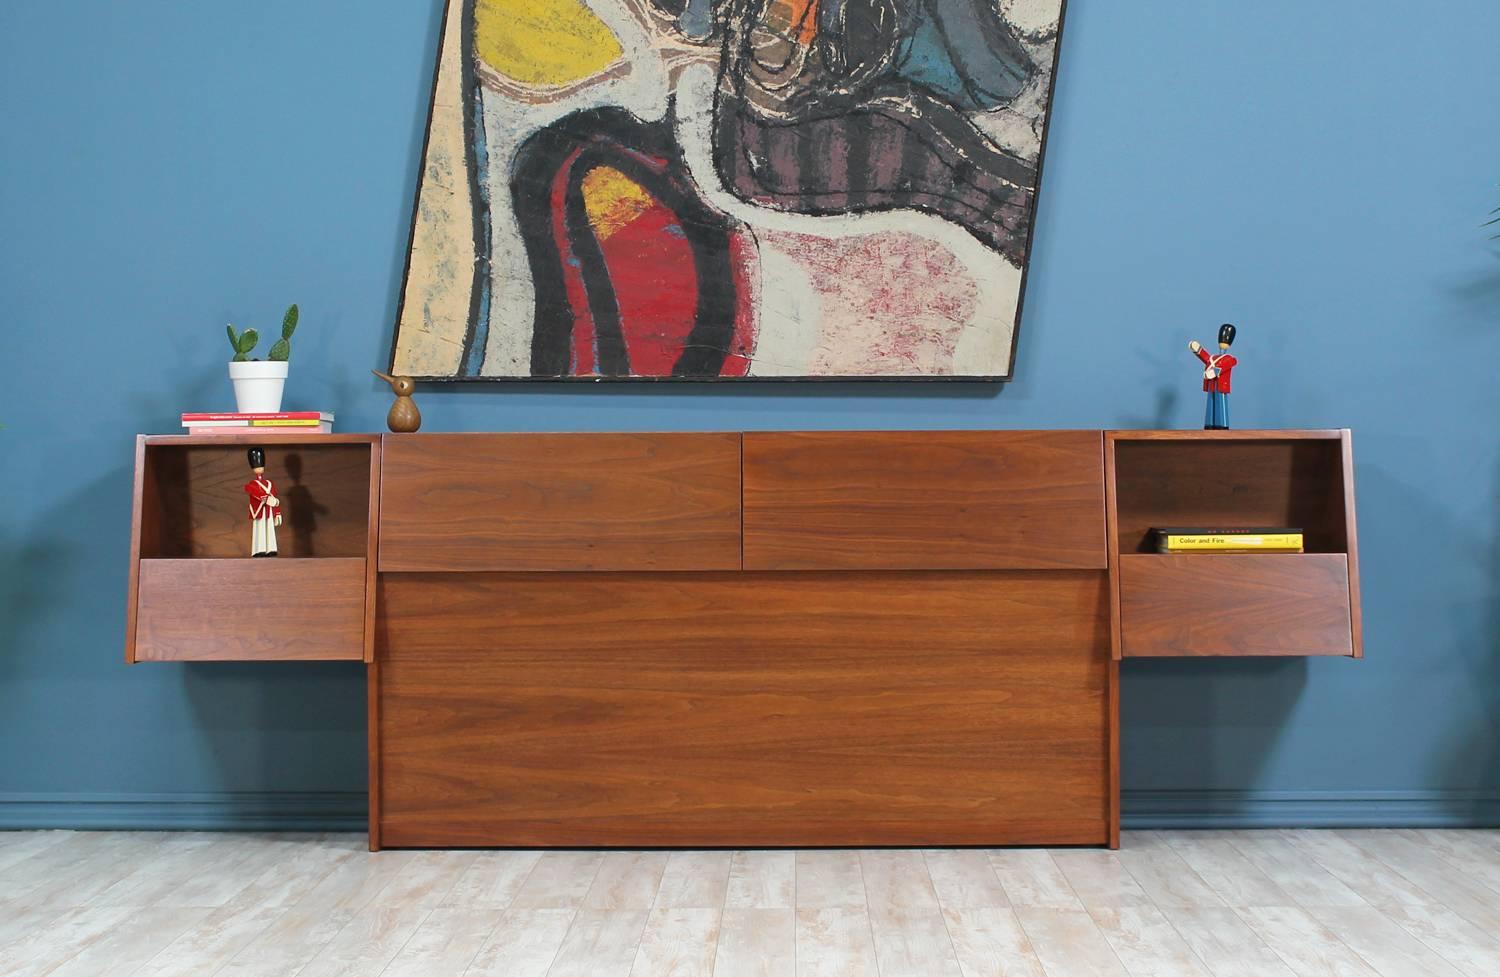 Spectacular Mid Century Modern Storage Headboard designed by Milo Baughman for Glenn of California in the United States circa 1950’s. This design features a walnut wood structure with two floating compartments coupled with a single drawer on each